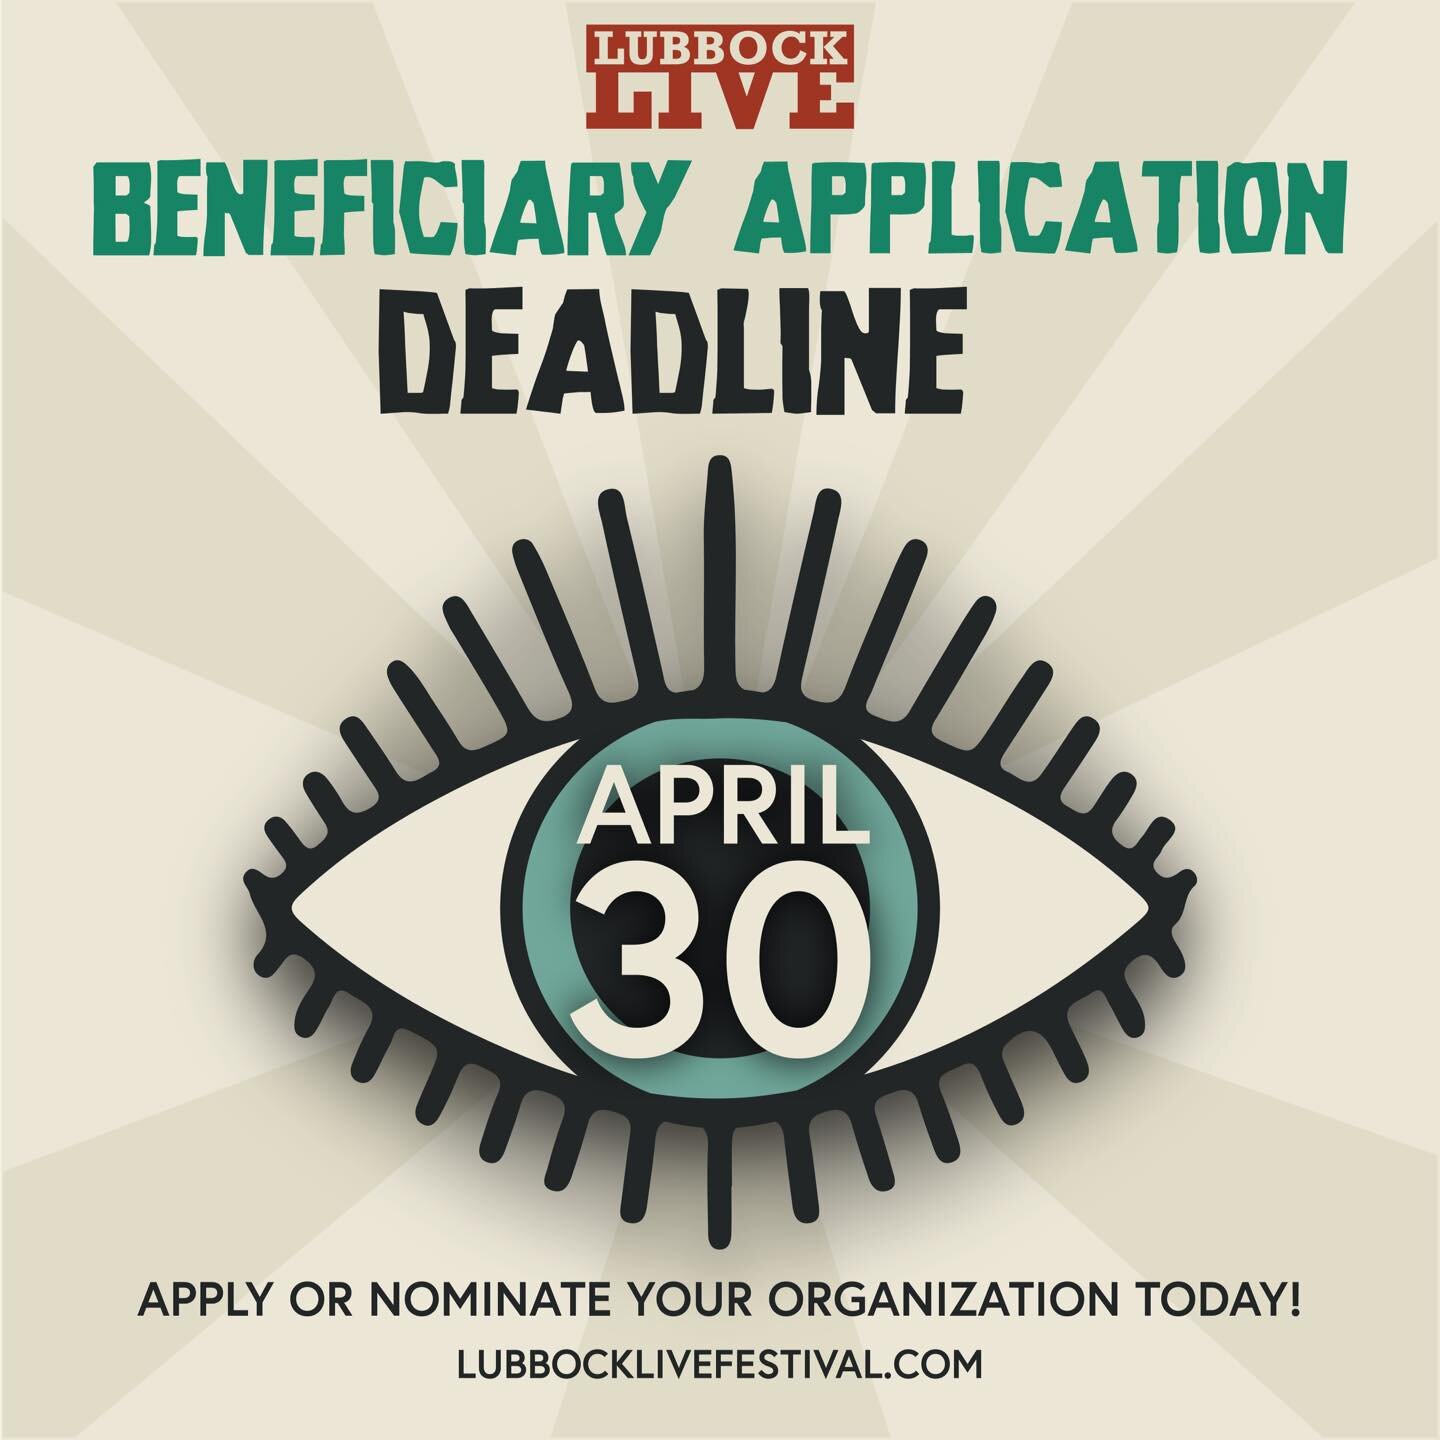 We are still taking applications for this year&rsquo;s Lubbock Live Festival beneficiary! 

For the past two years, Lubbock Live has managed to raise funds for two amazing Lubbock arts organizations, and this year we are looking for another great cau